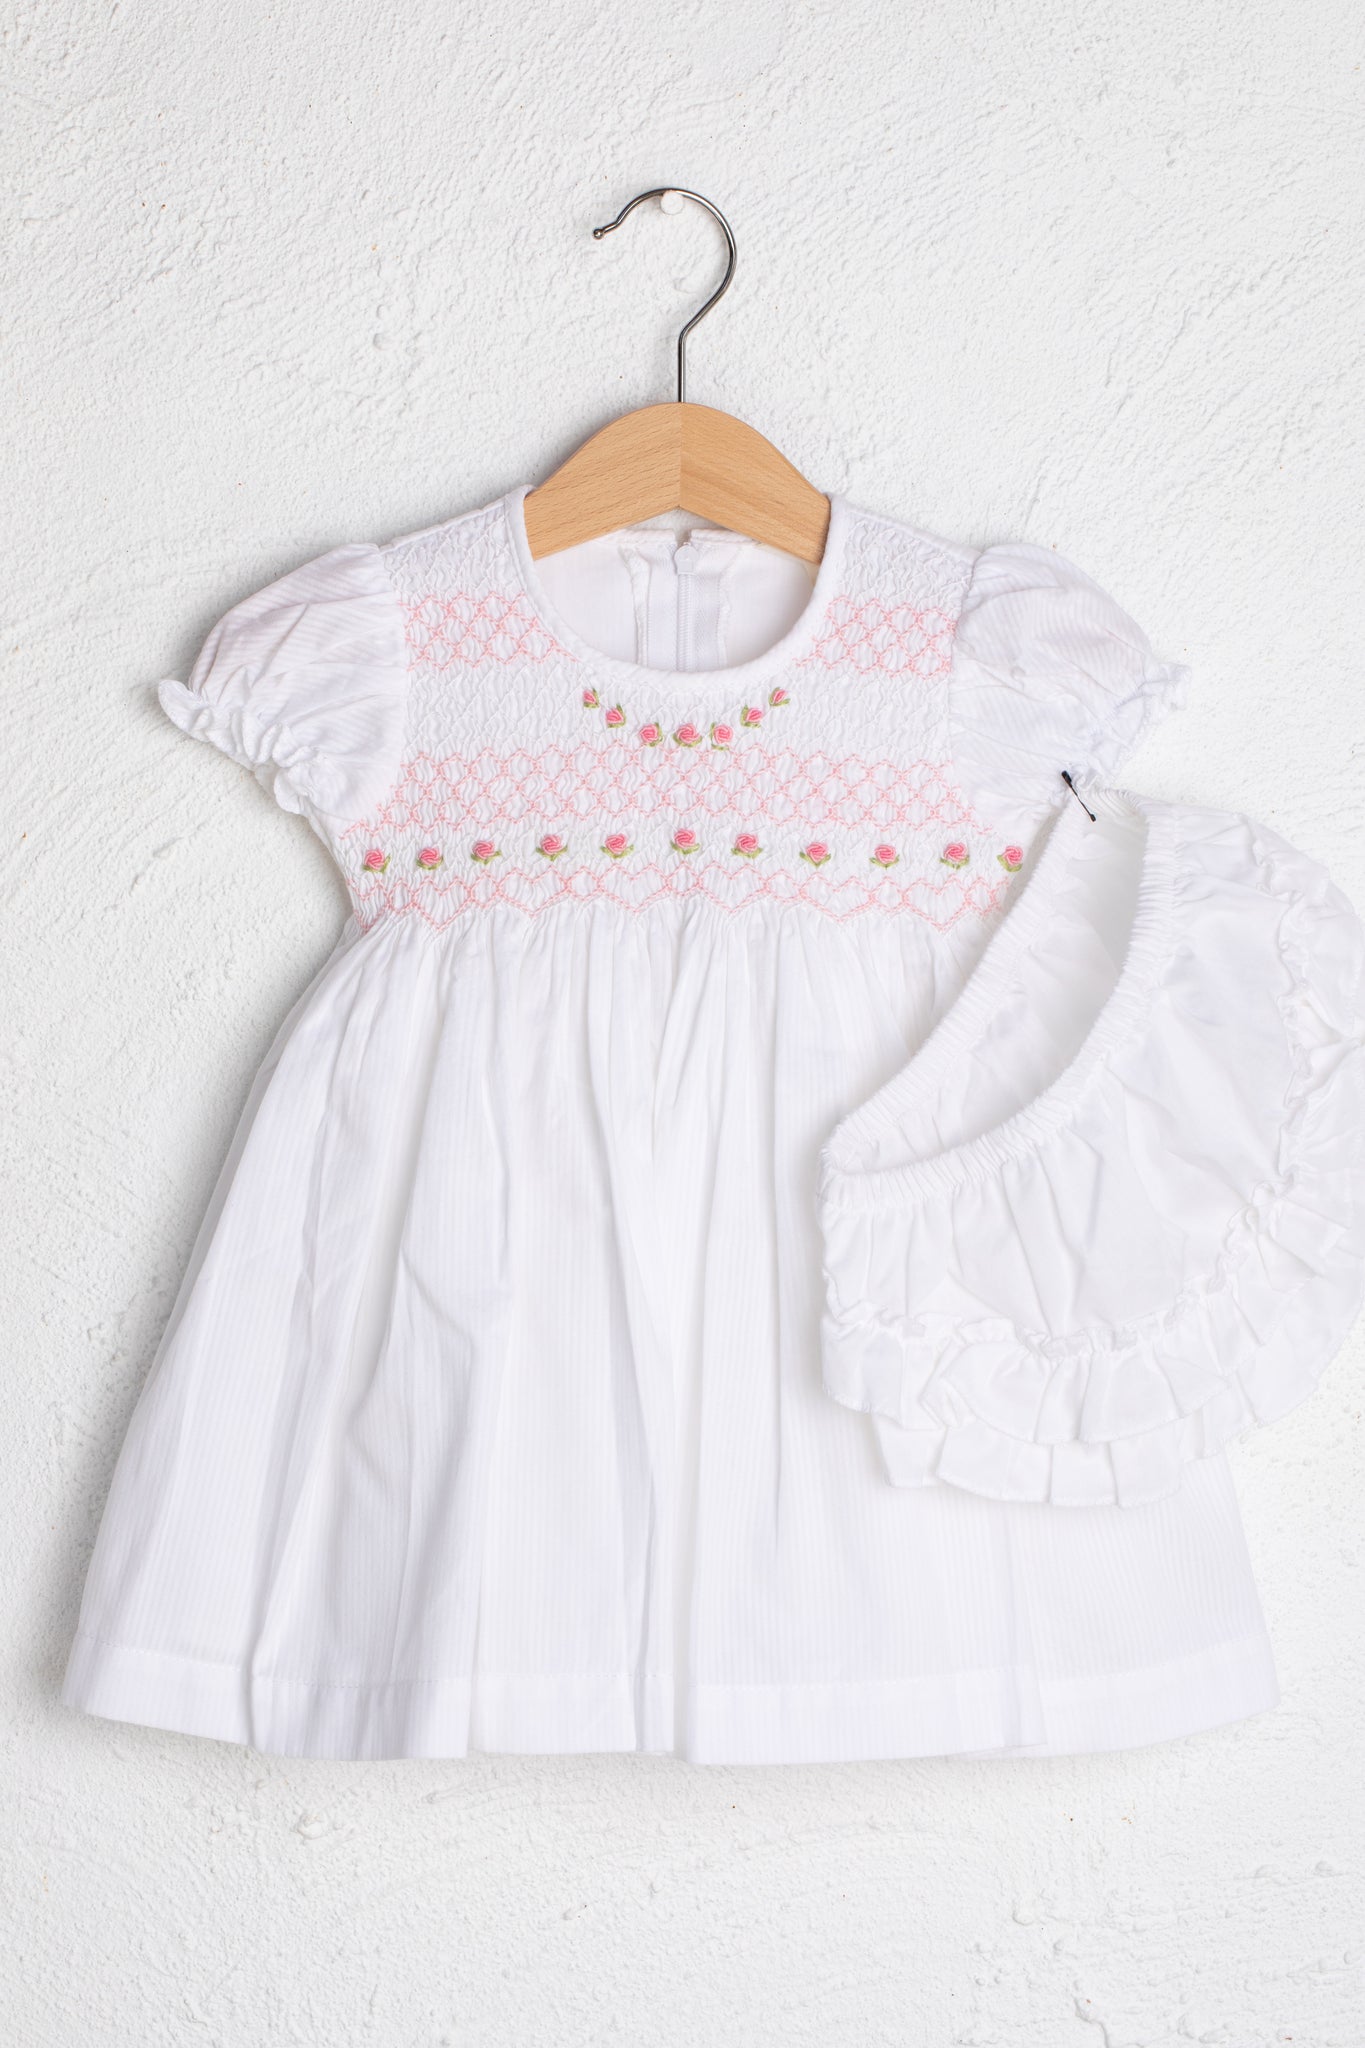 Dot & Mila White Smocked Dress and Bloomers Size 0